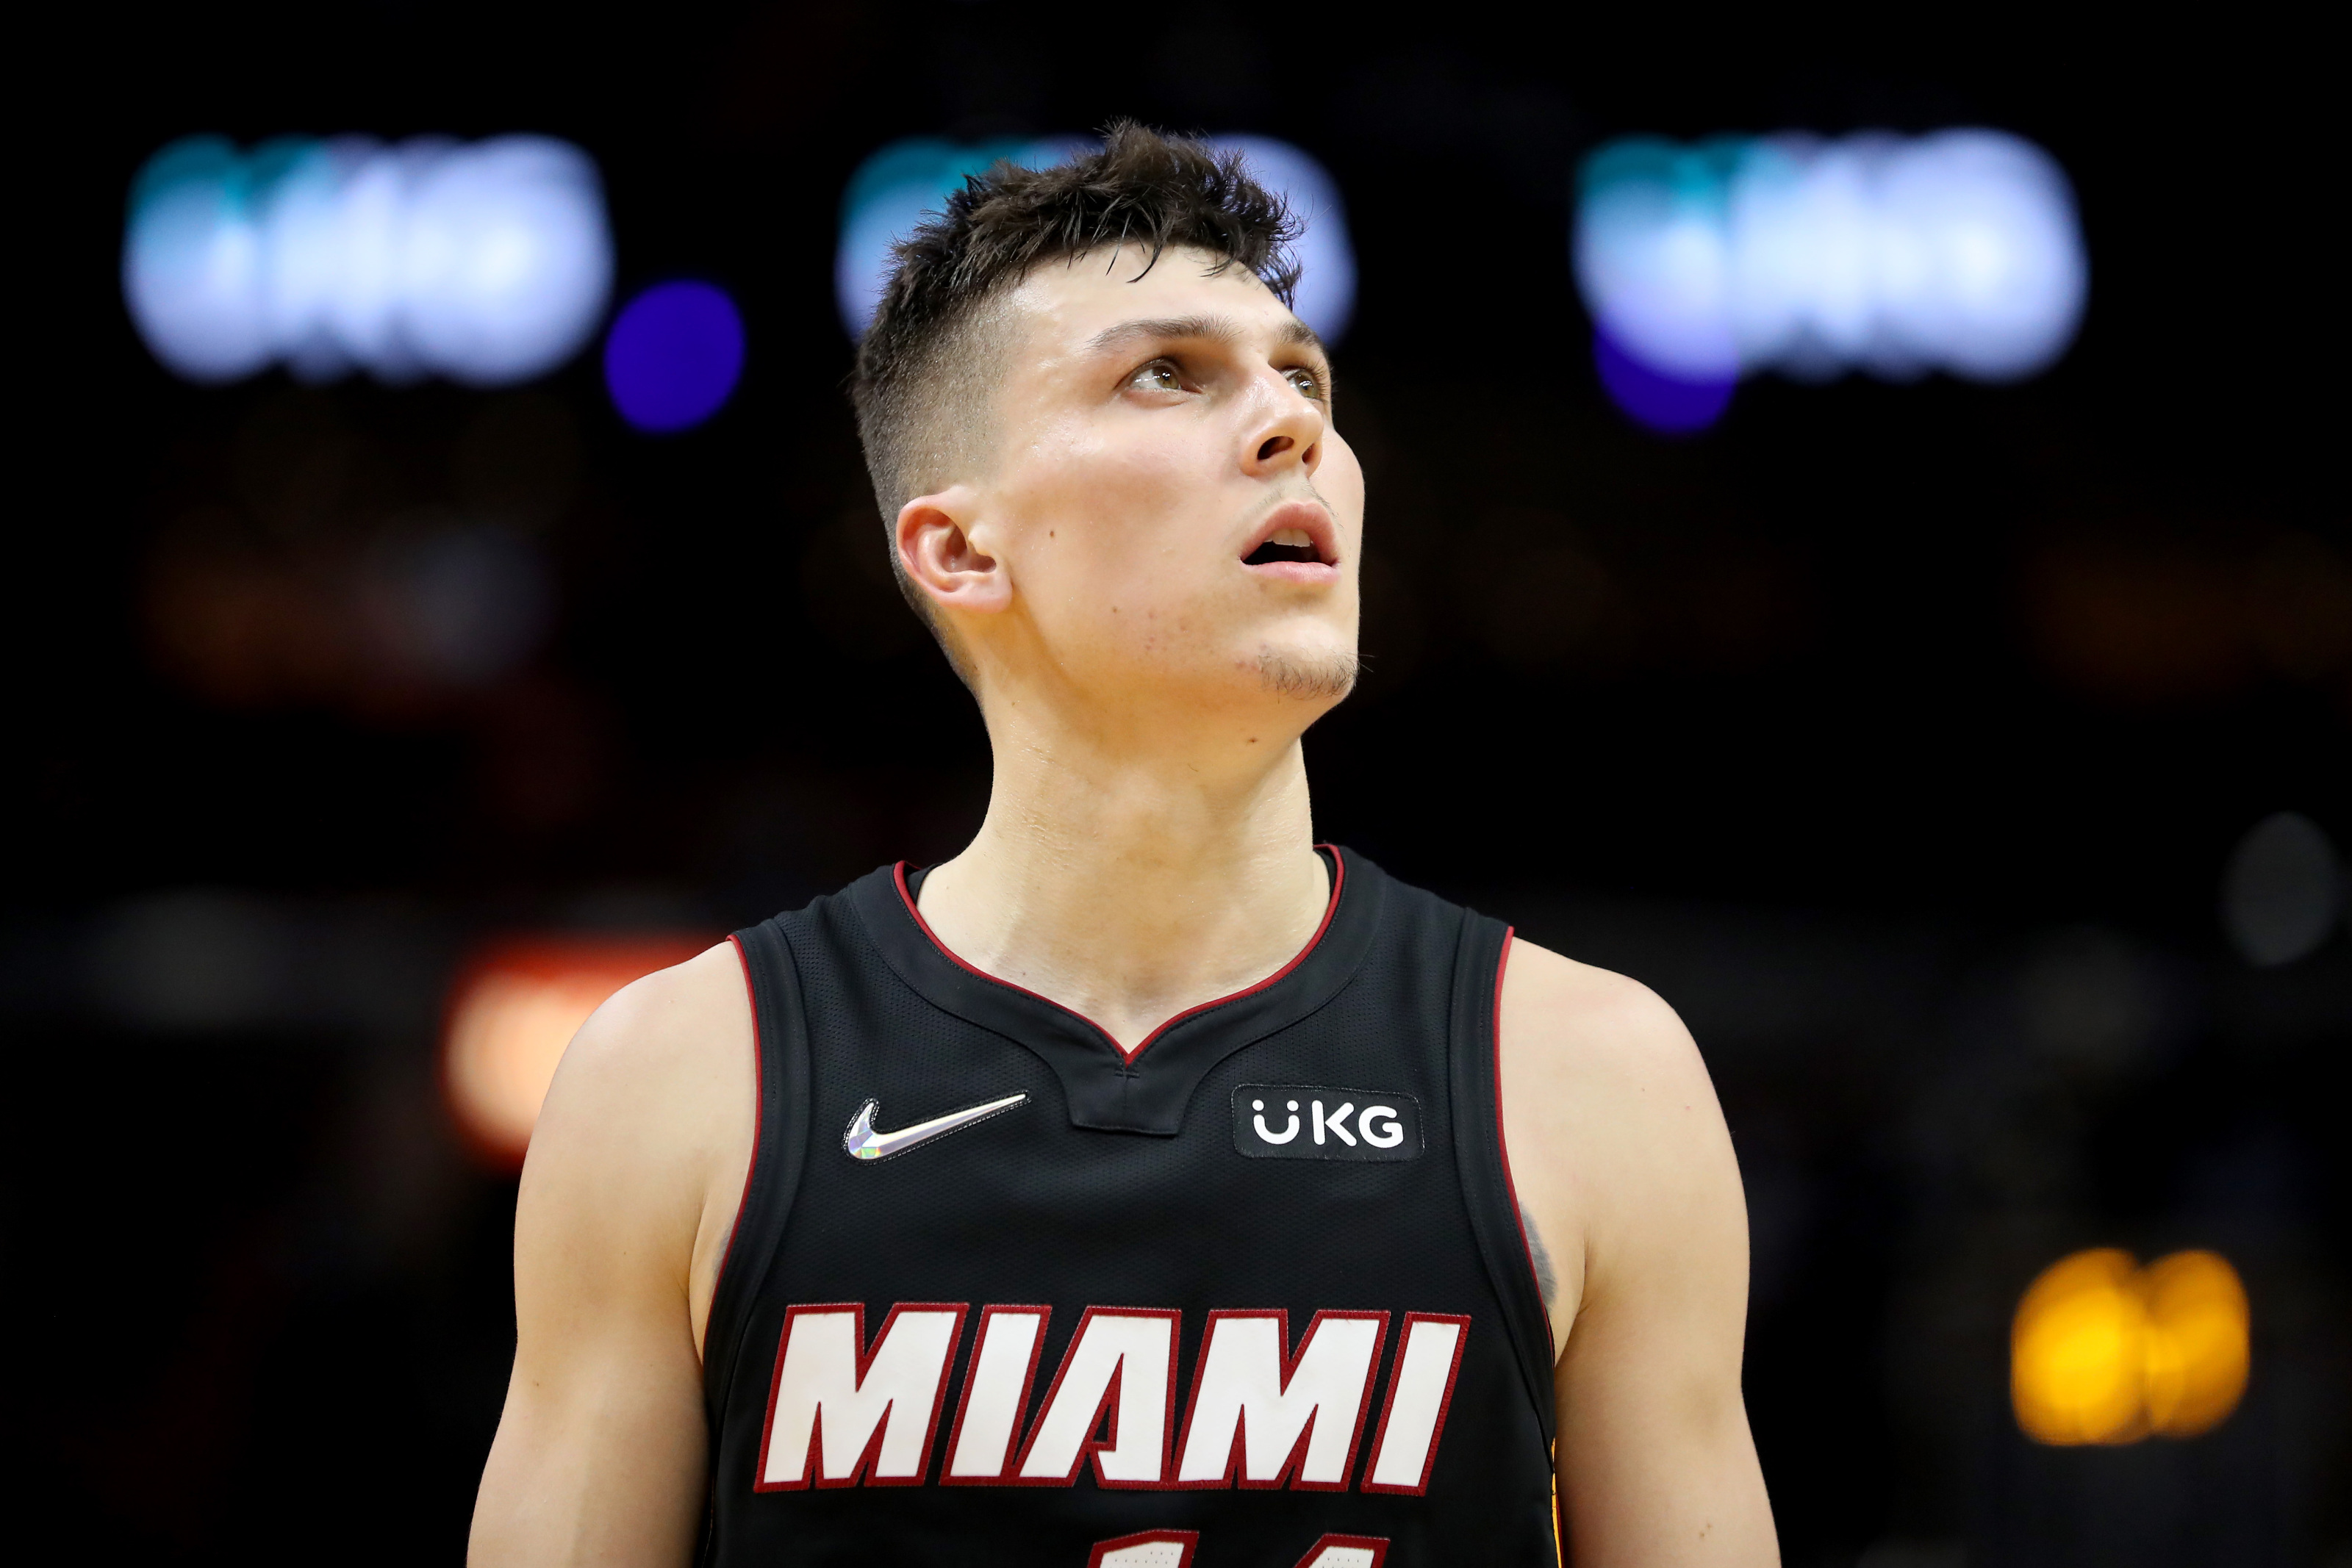 Tyler Herro's fashion becomes subject on Twitter during NBA Draft